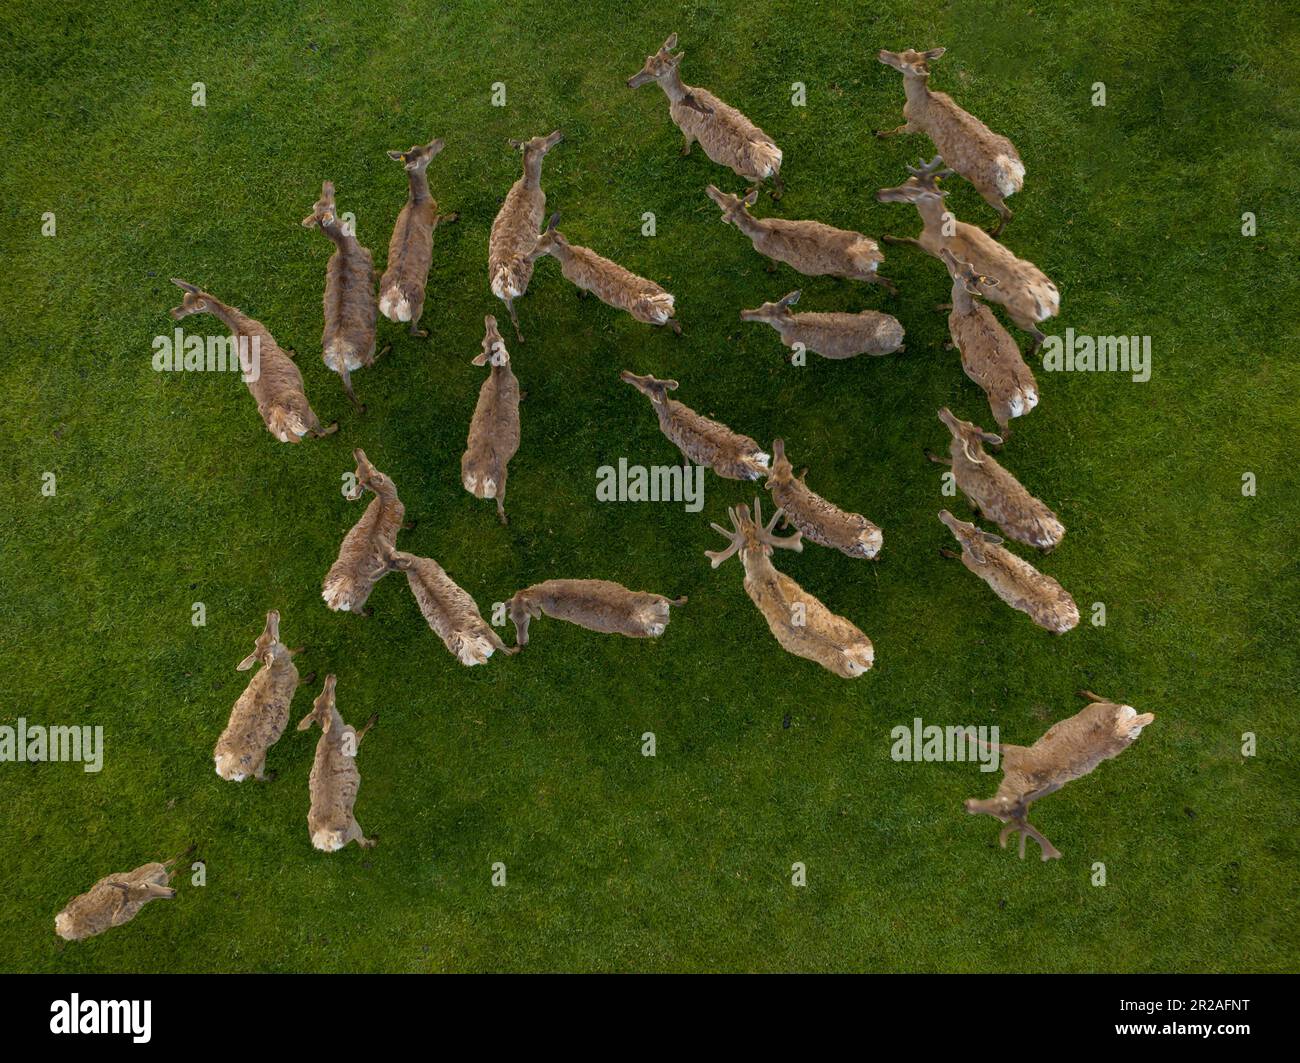 Deers her from above. green photo about 20 deers in a field Stock Photo